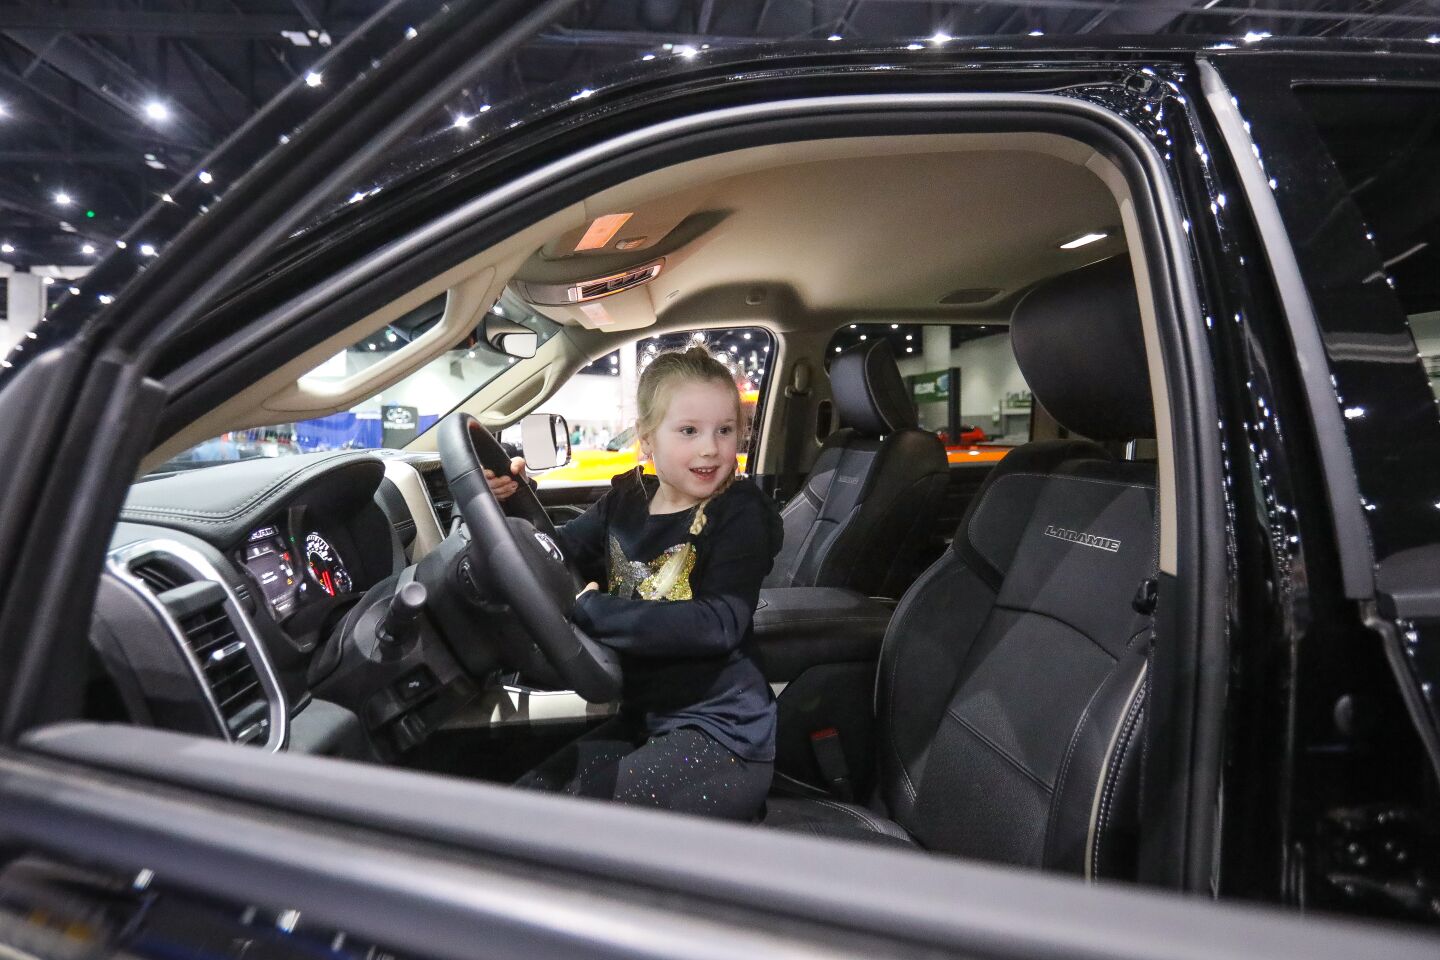 Brenley Trimpi, 5, from El Cajon, sits in the cab of a 2020 Ram 1500 Bighorn Crew Cab 4x4 pickup truck during the 2020 San Diego International Auto Show, January 4, 2020 at the San Diego Convention Center.